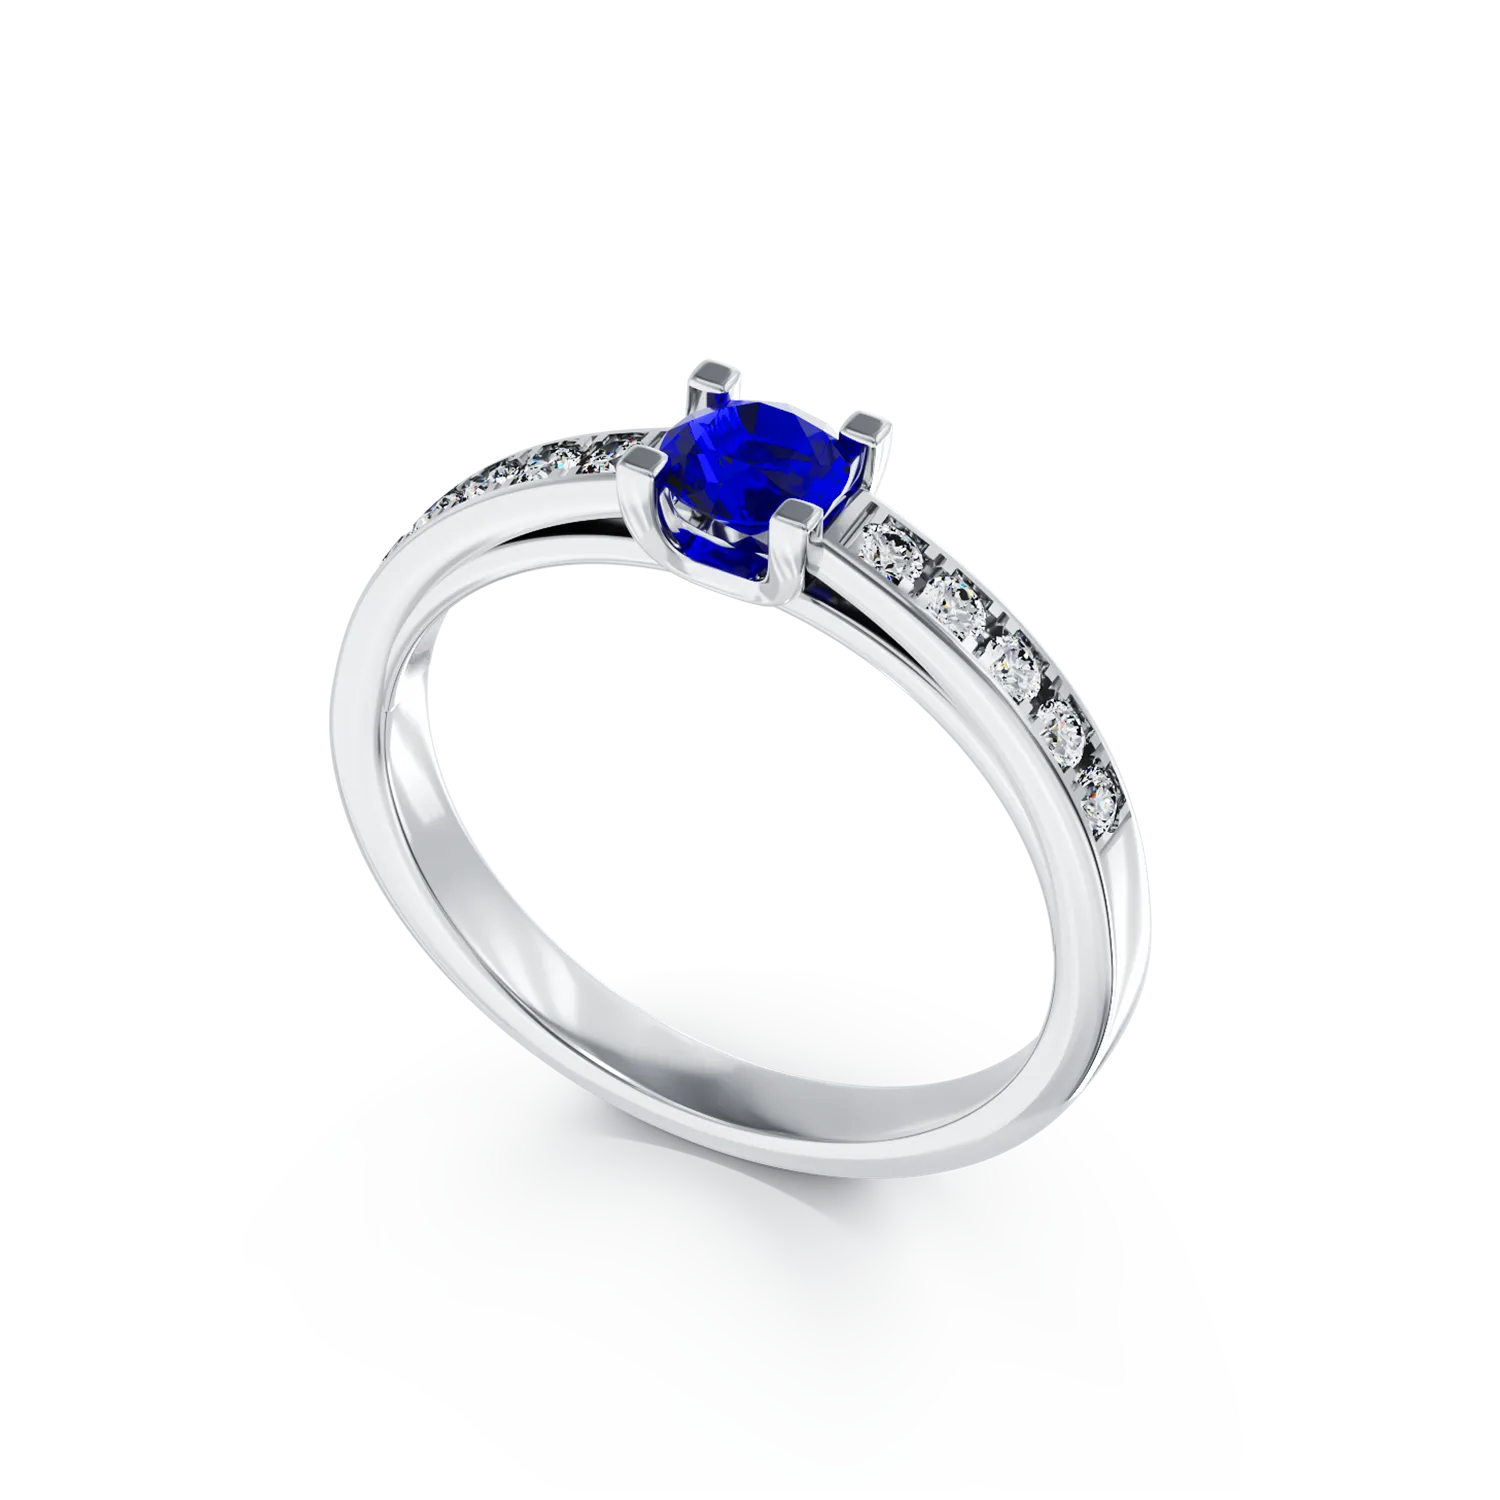 18k white gold engagement ring with 0.299ct sapphire and 0.135ct diamonds